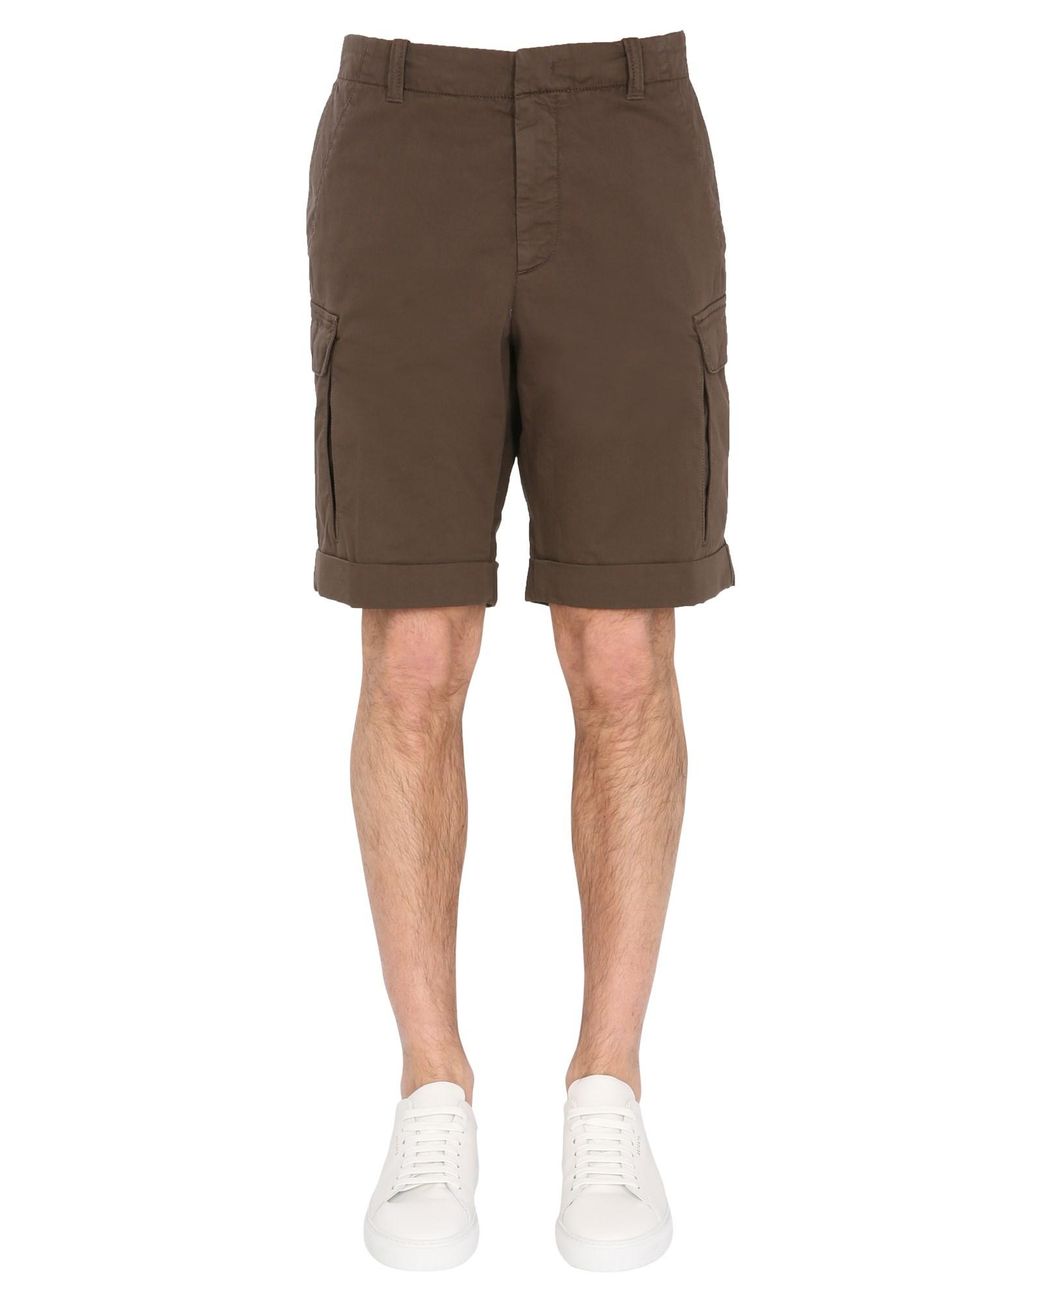 Z Zegna Cotton Cargo Shorts With Iconic Lens in Brown for Men - Lyst